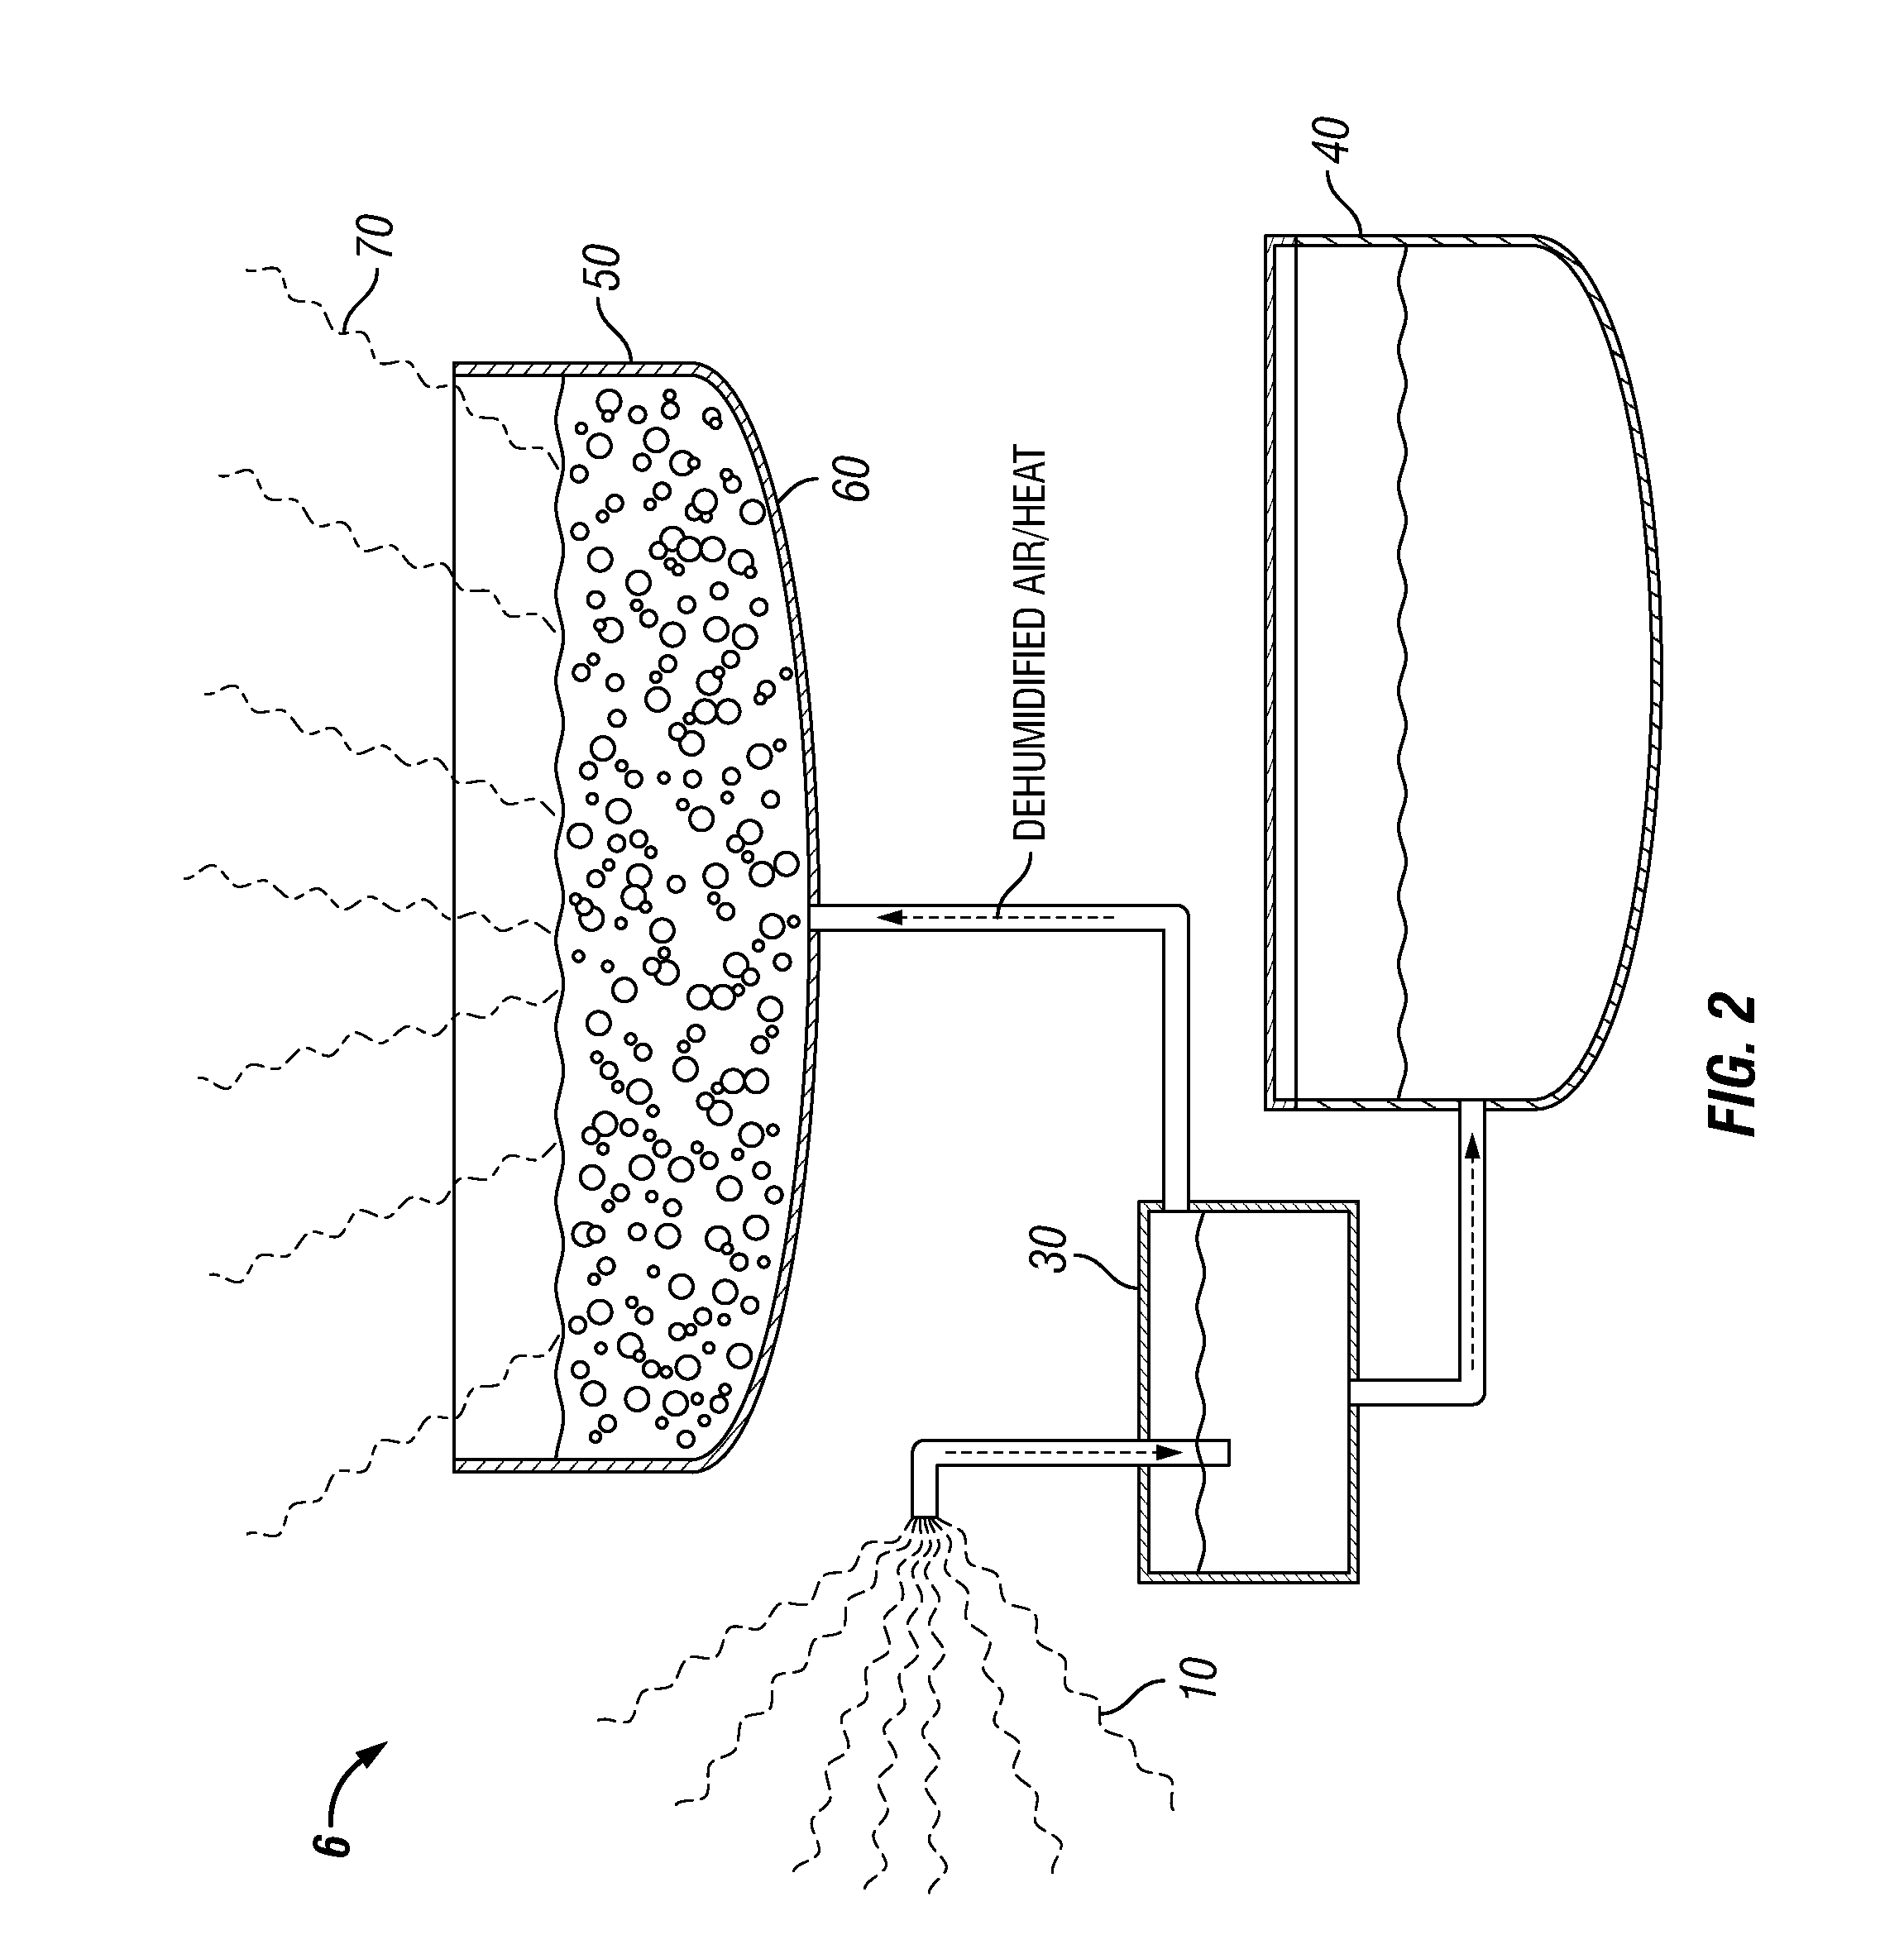 Process for Water Treatment and Generation